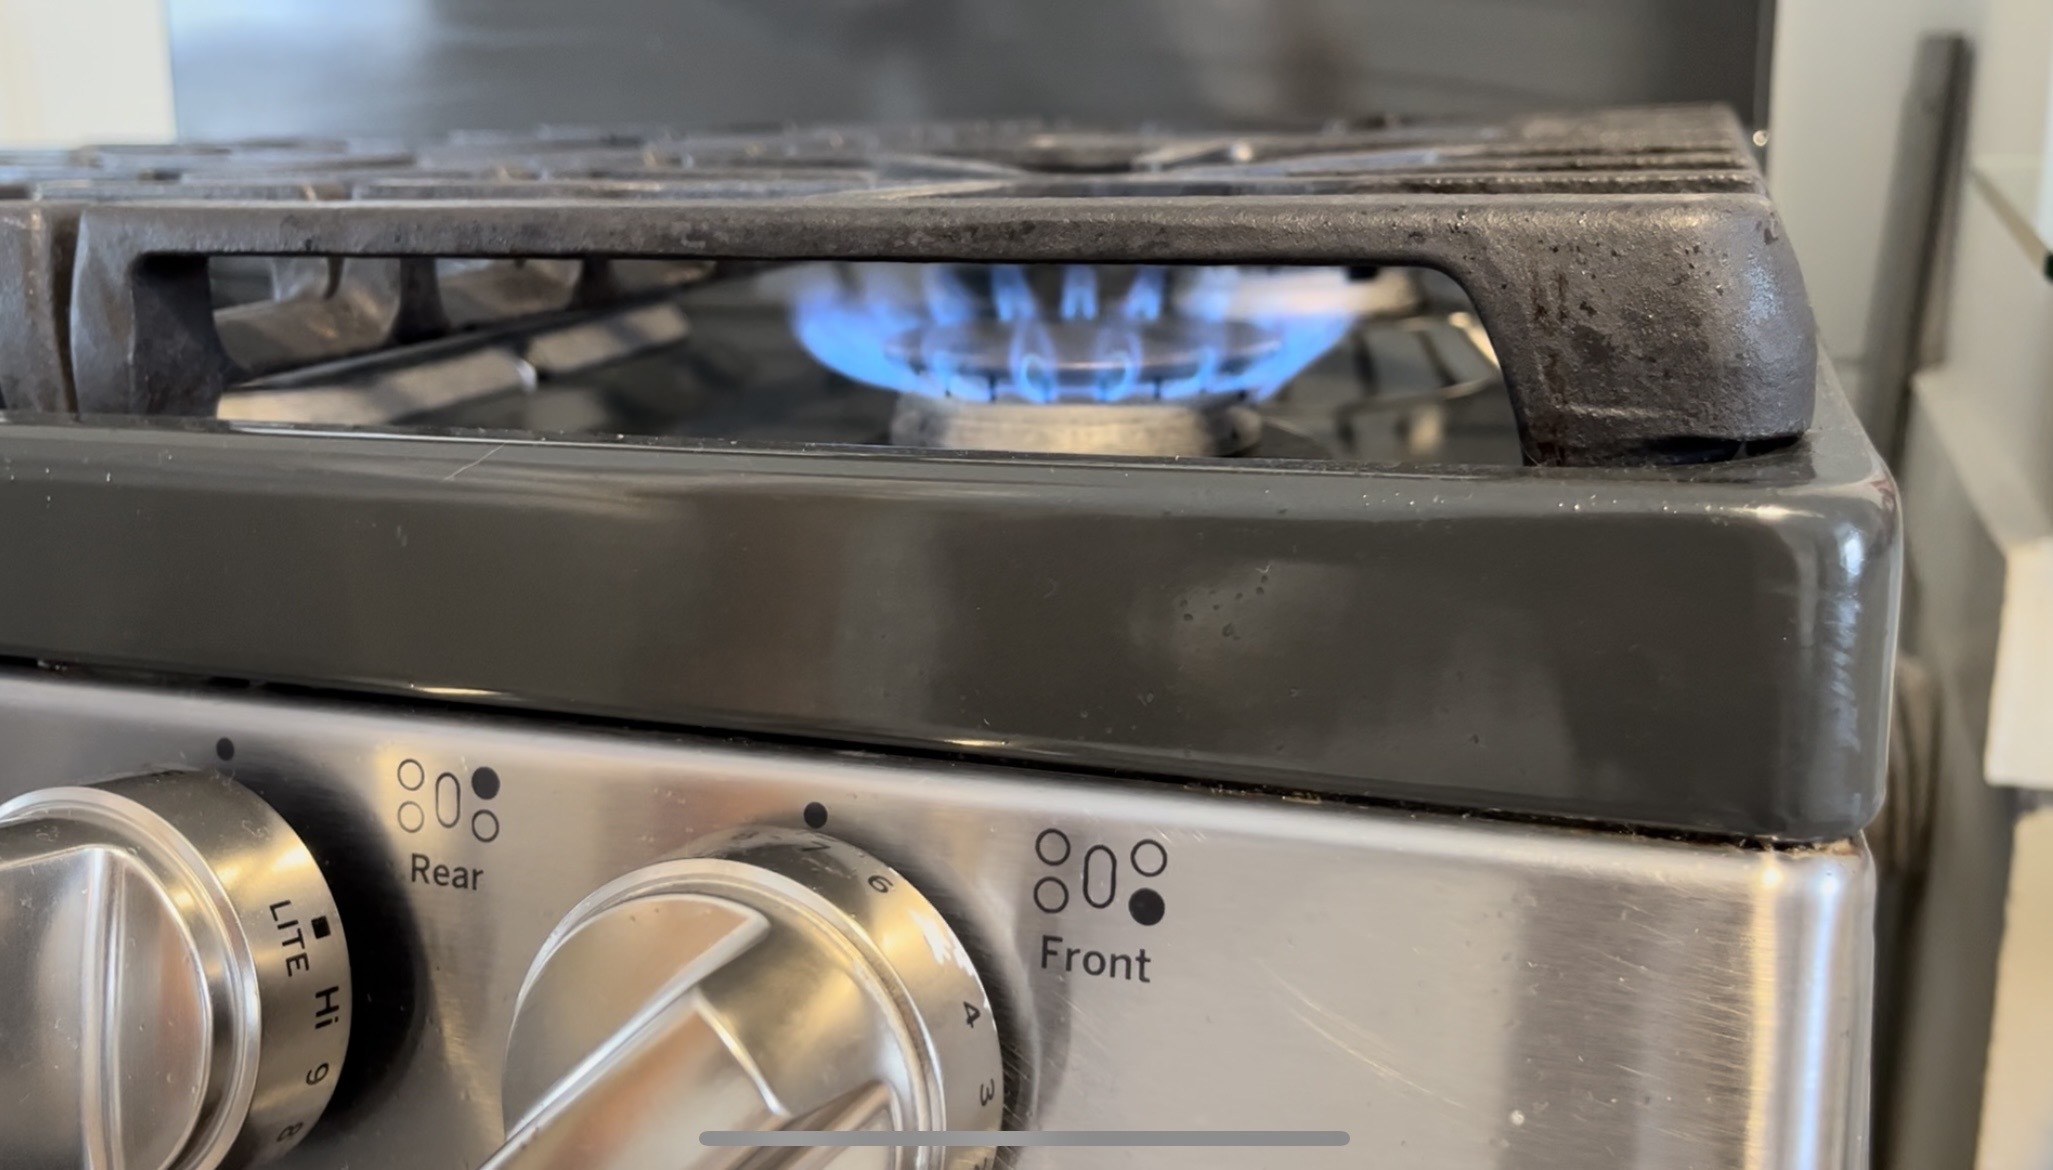 Gas vs. electric stove debate simmers on, but local chefs prefer